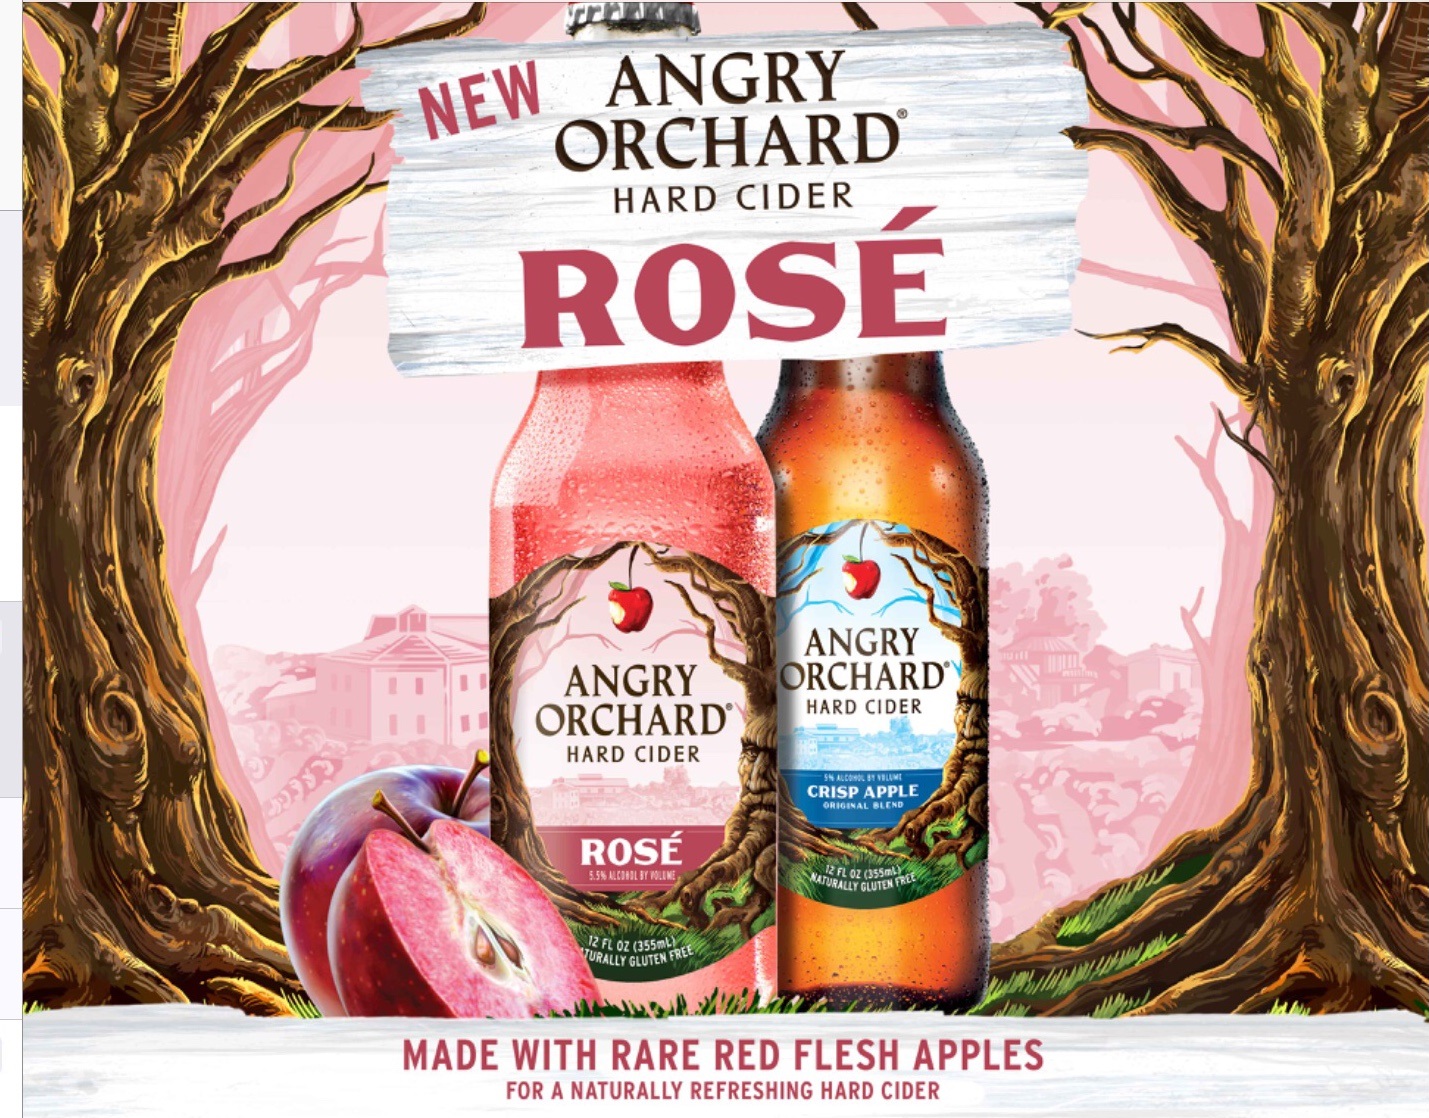 Win 2 Tickets to the Kentucky Derby from Angry Orchard - Kin